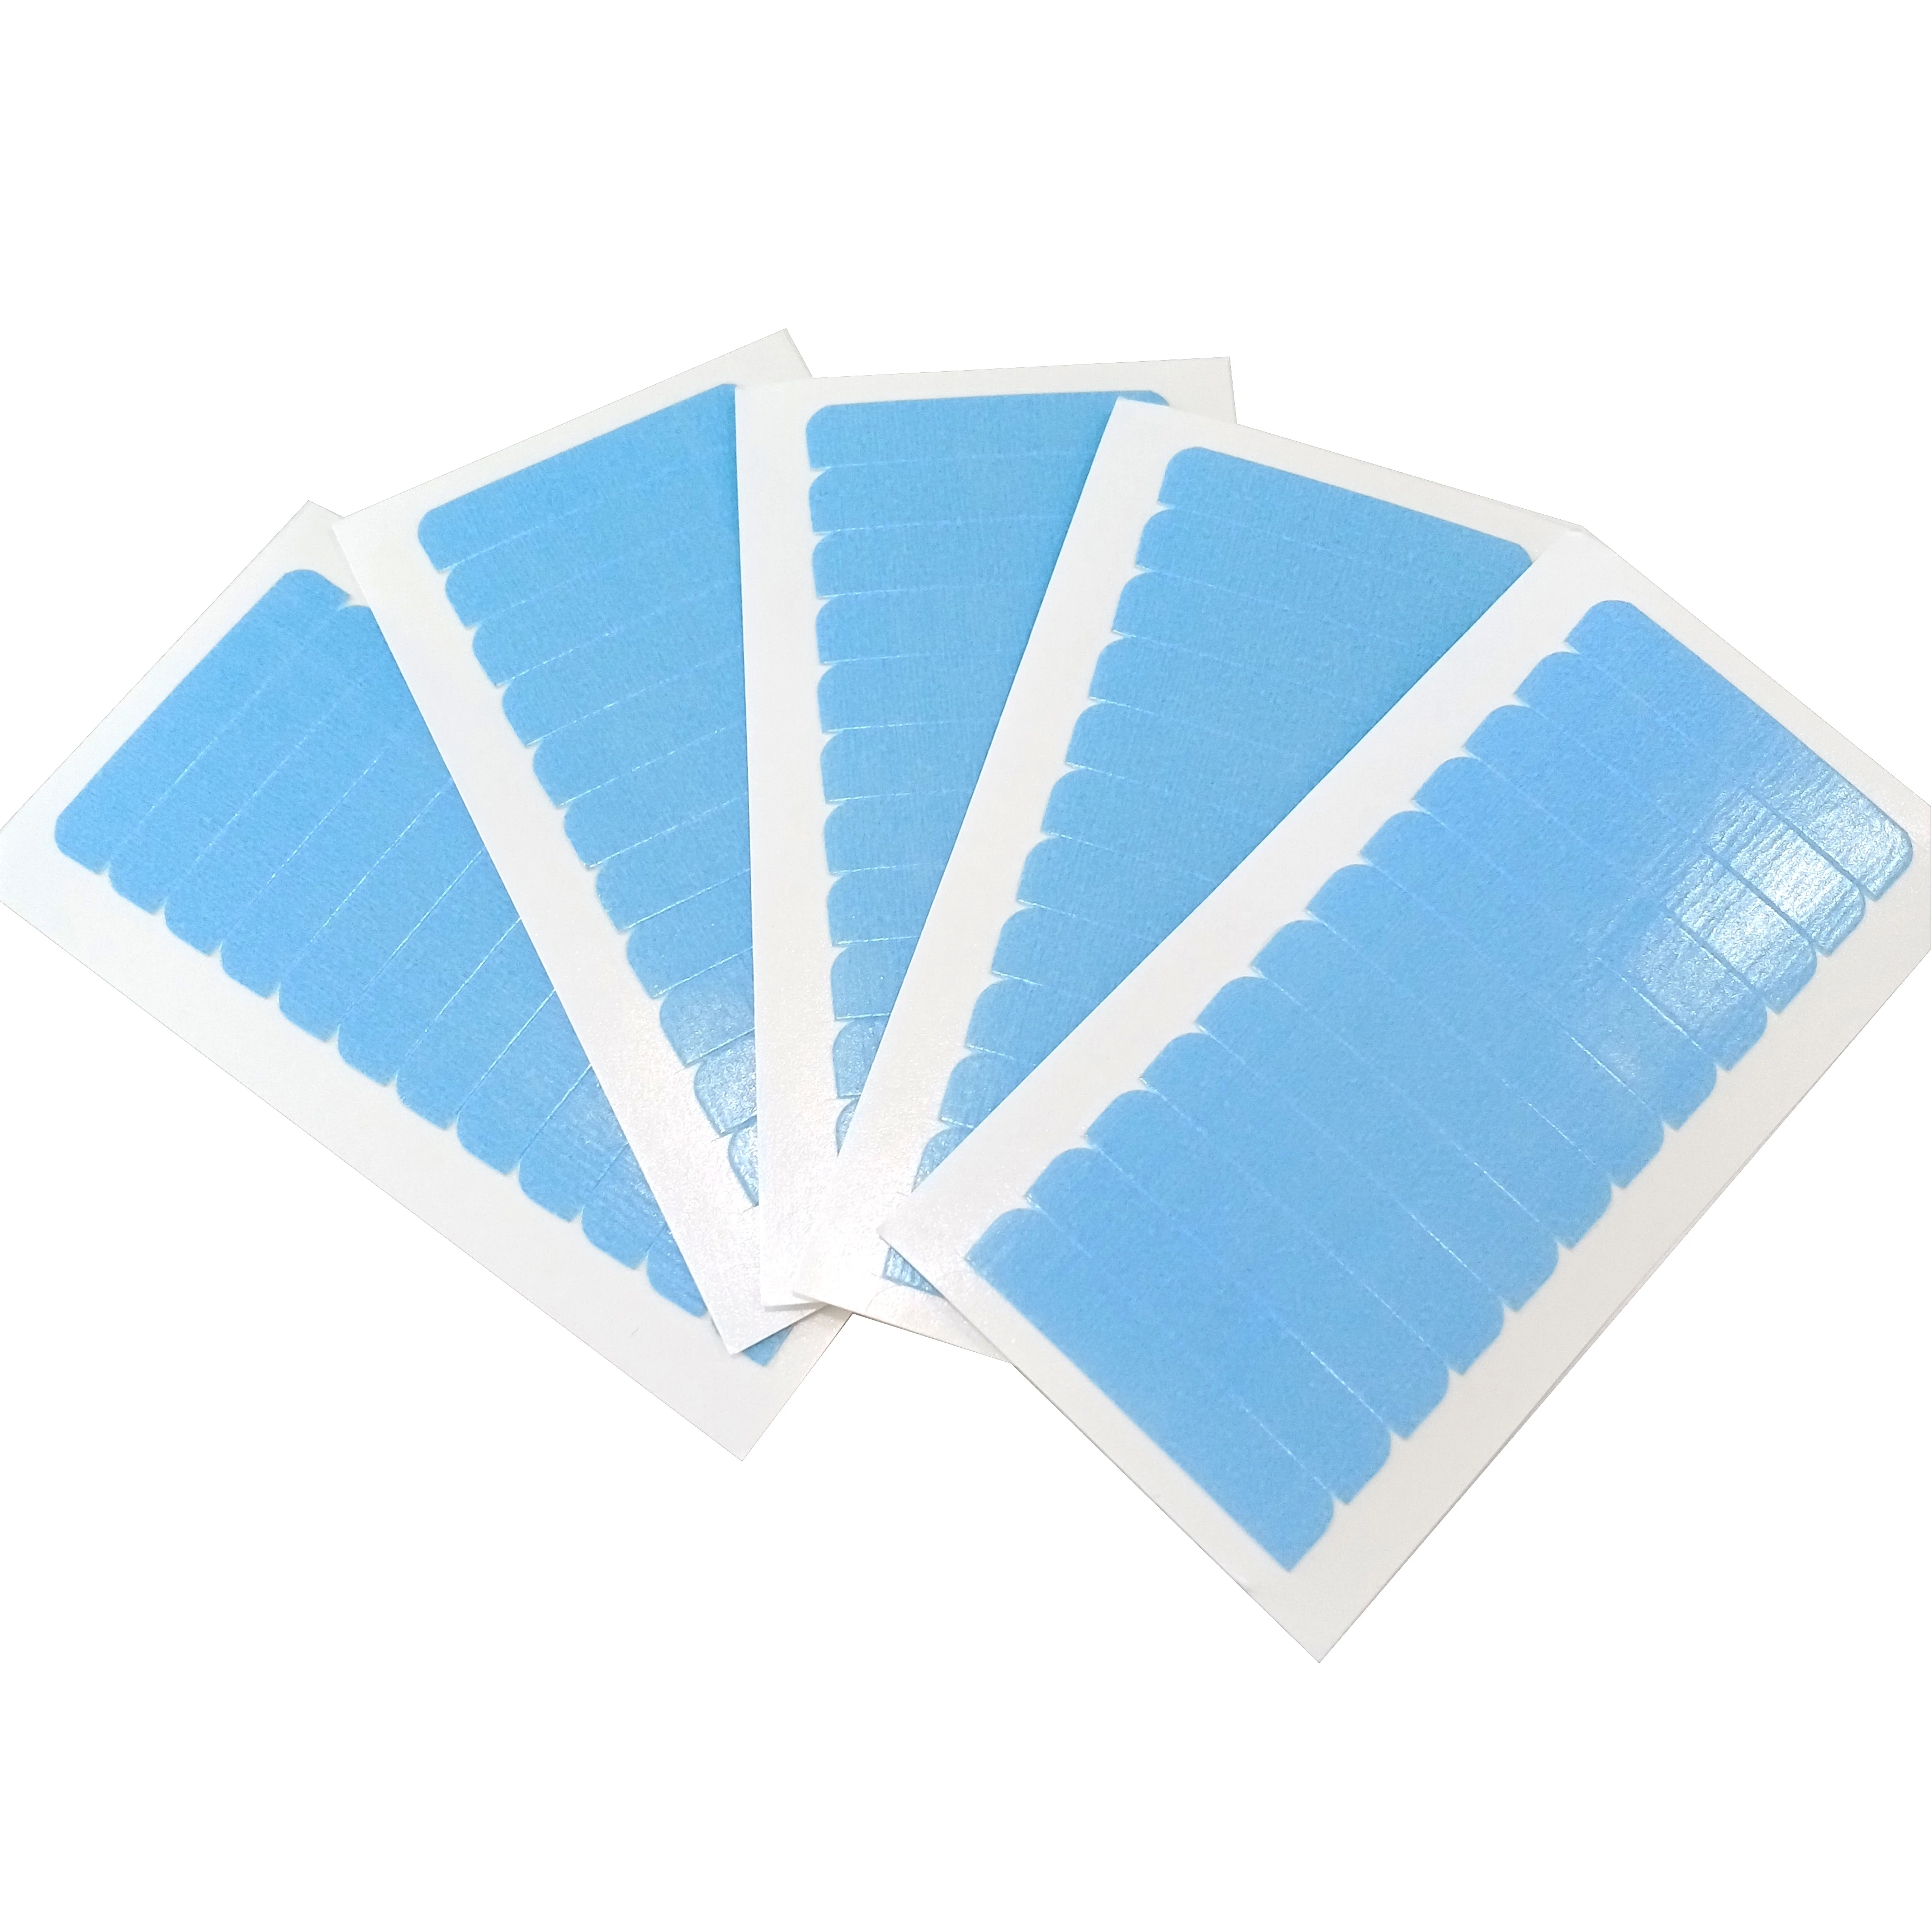 

Hair System Double sided Tape Tabs 60PCS Replace Adhesive Pre-cut Blue/White/Yellow Tape for Tape-in Hair Extensions, White/blue/yellow